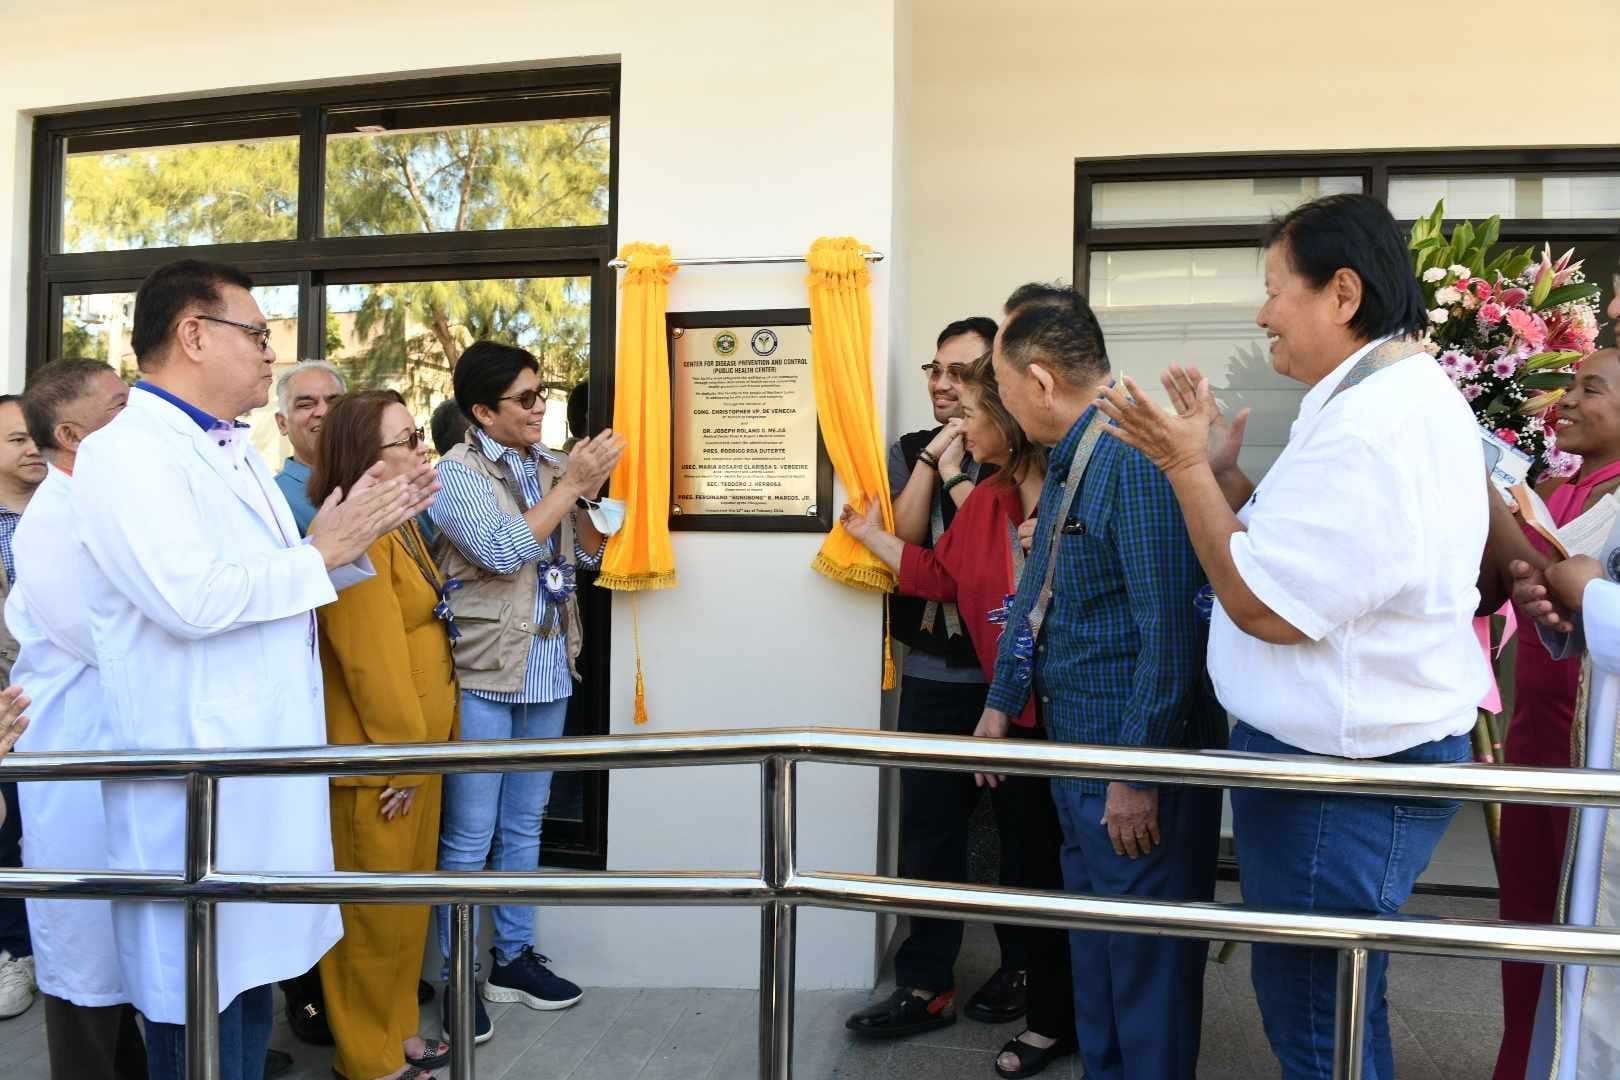 DOH opens first disease prevention and control center in Ilocos region